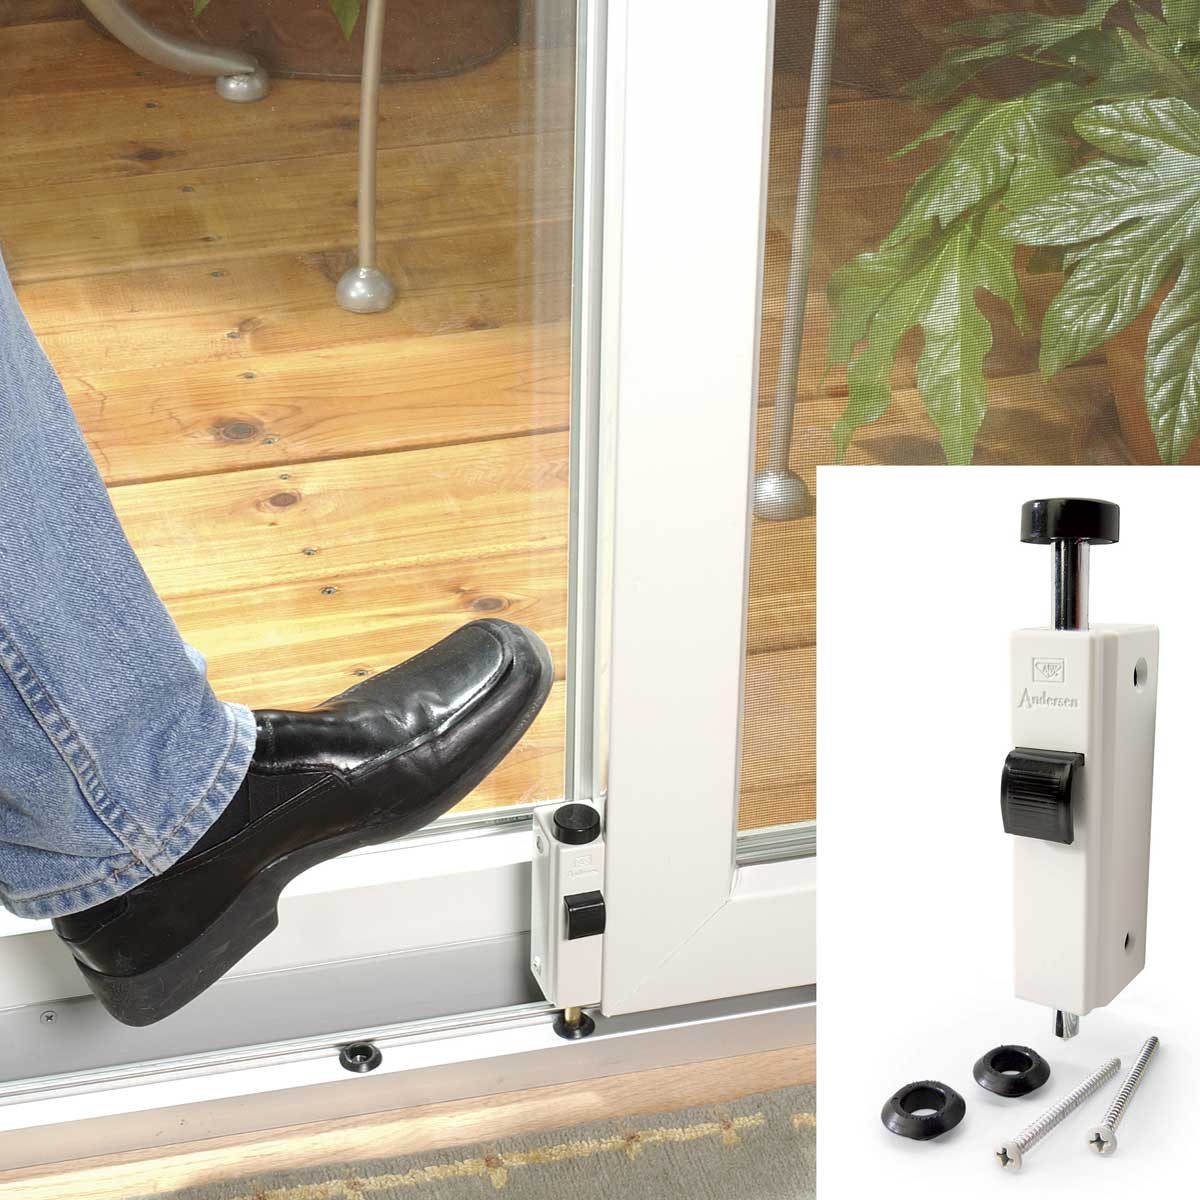 What are some tips for buying patio door security locks?